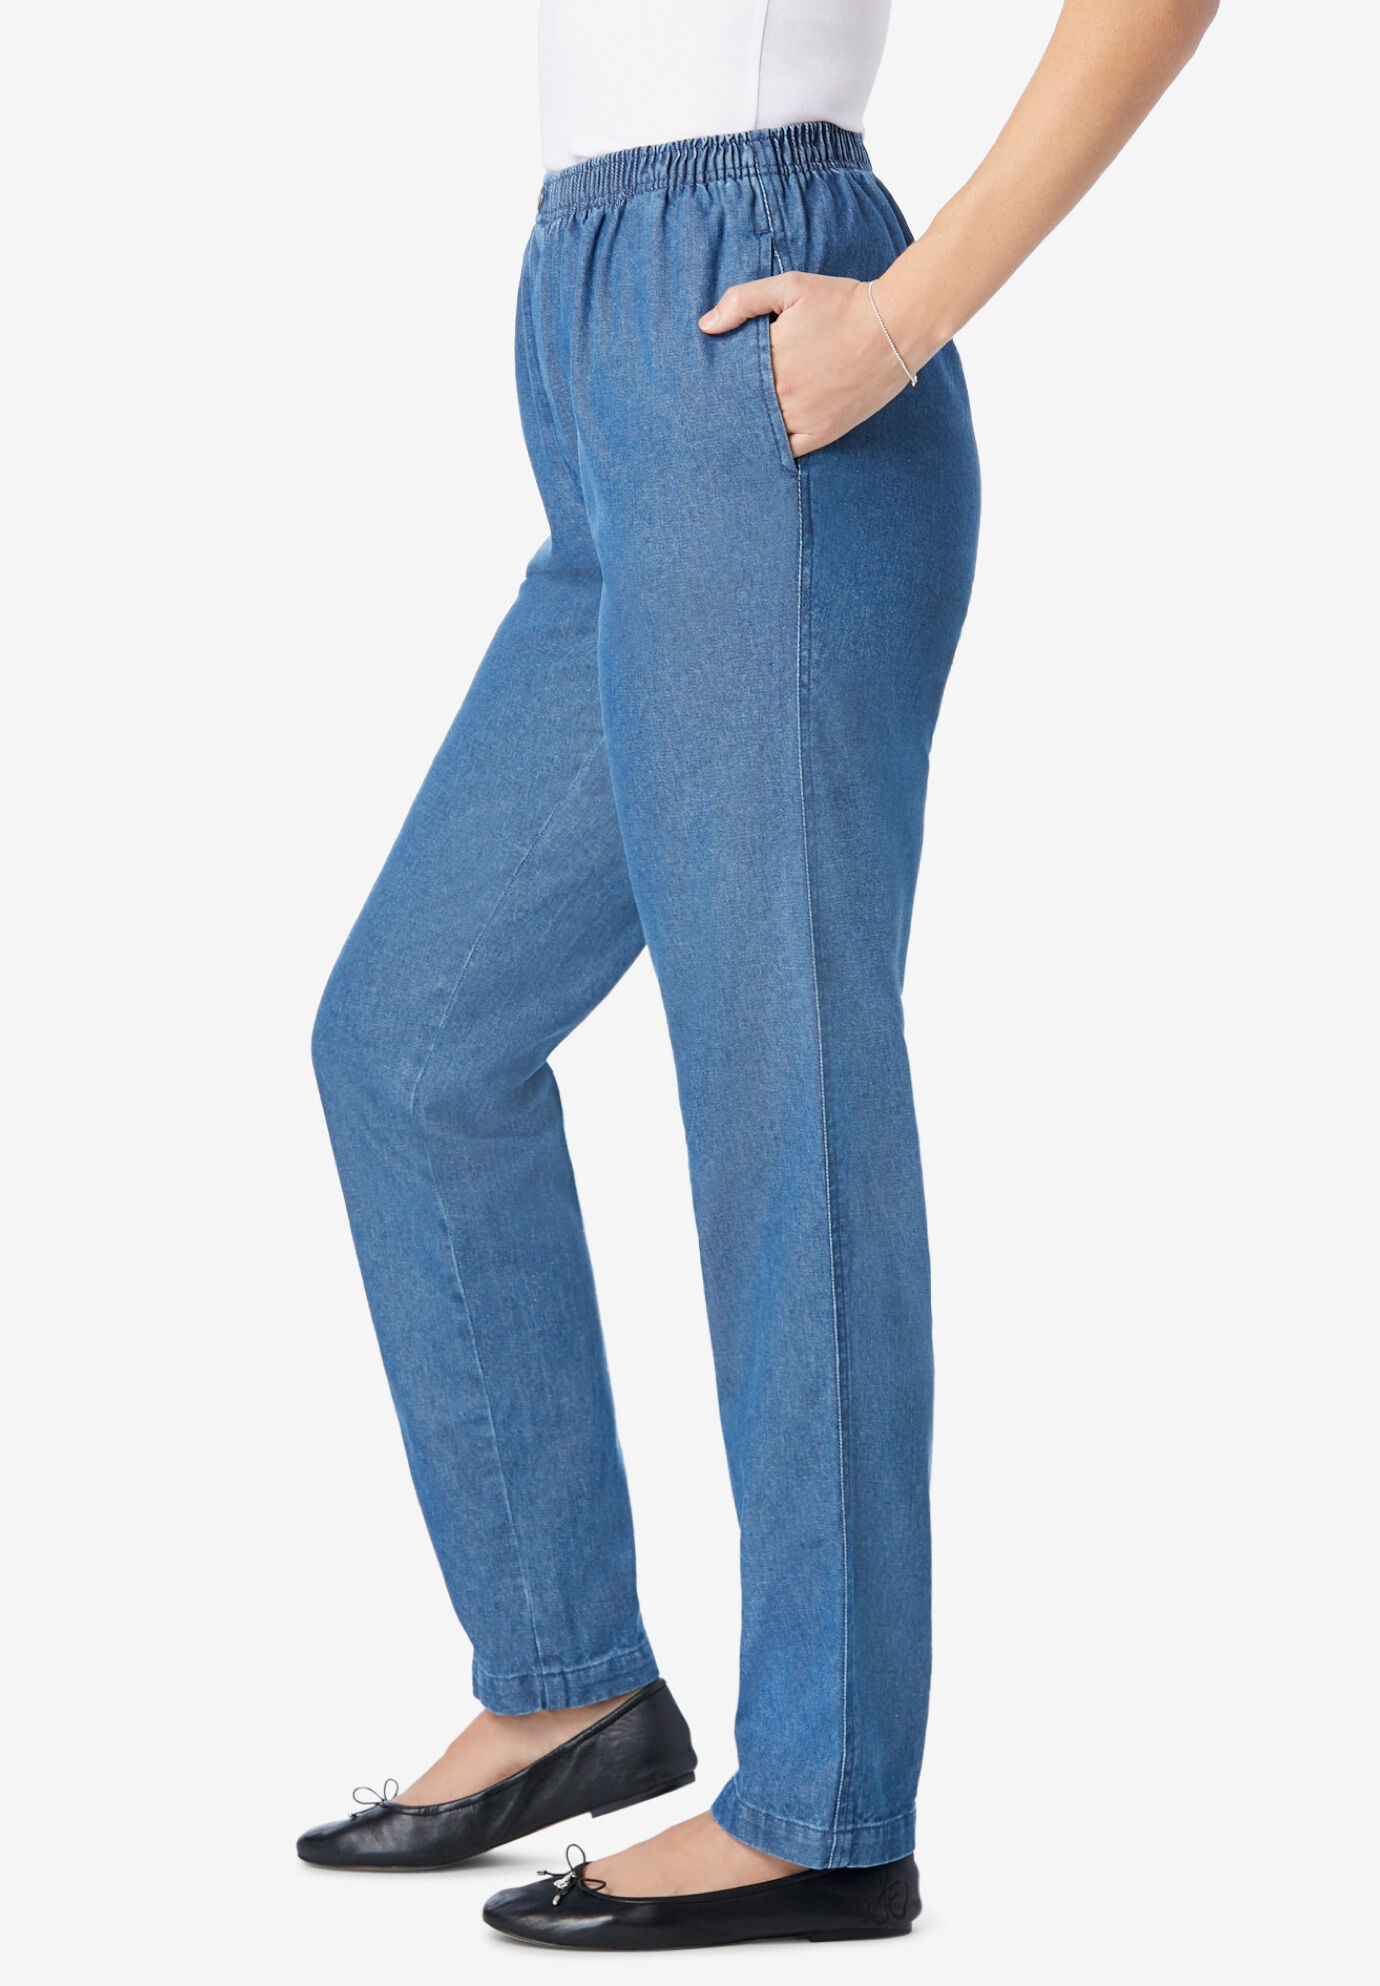 Shoppers Say the Iximo Linen Pants Are 'Perfect for Summer'